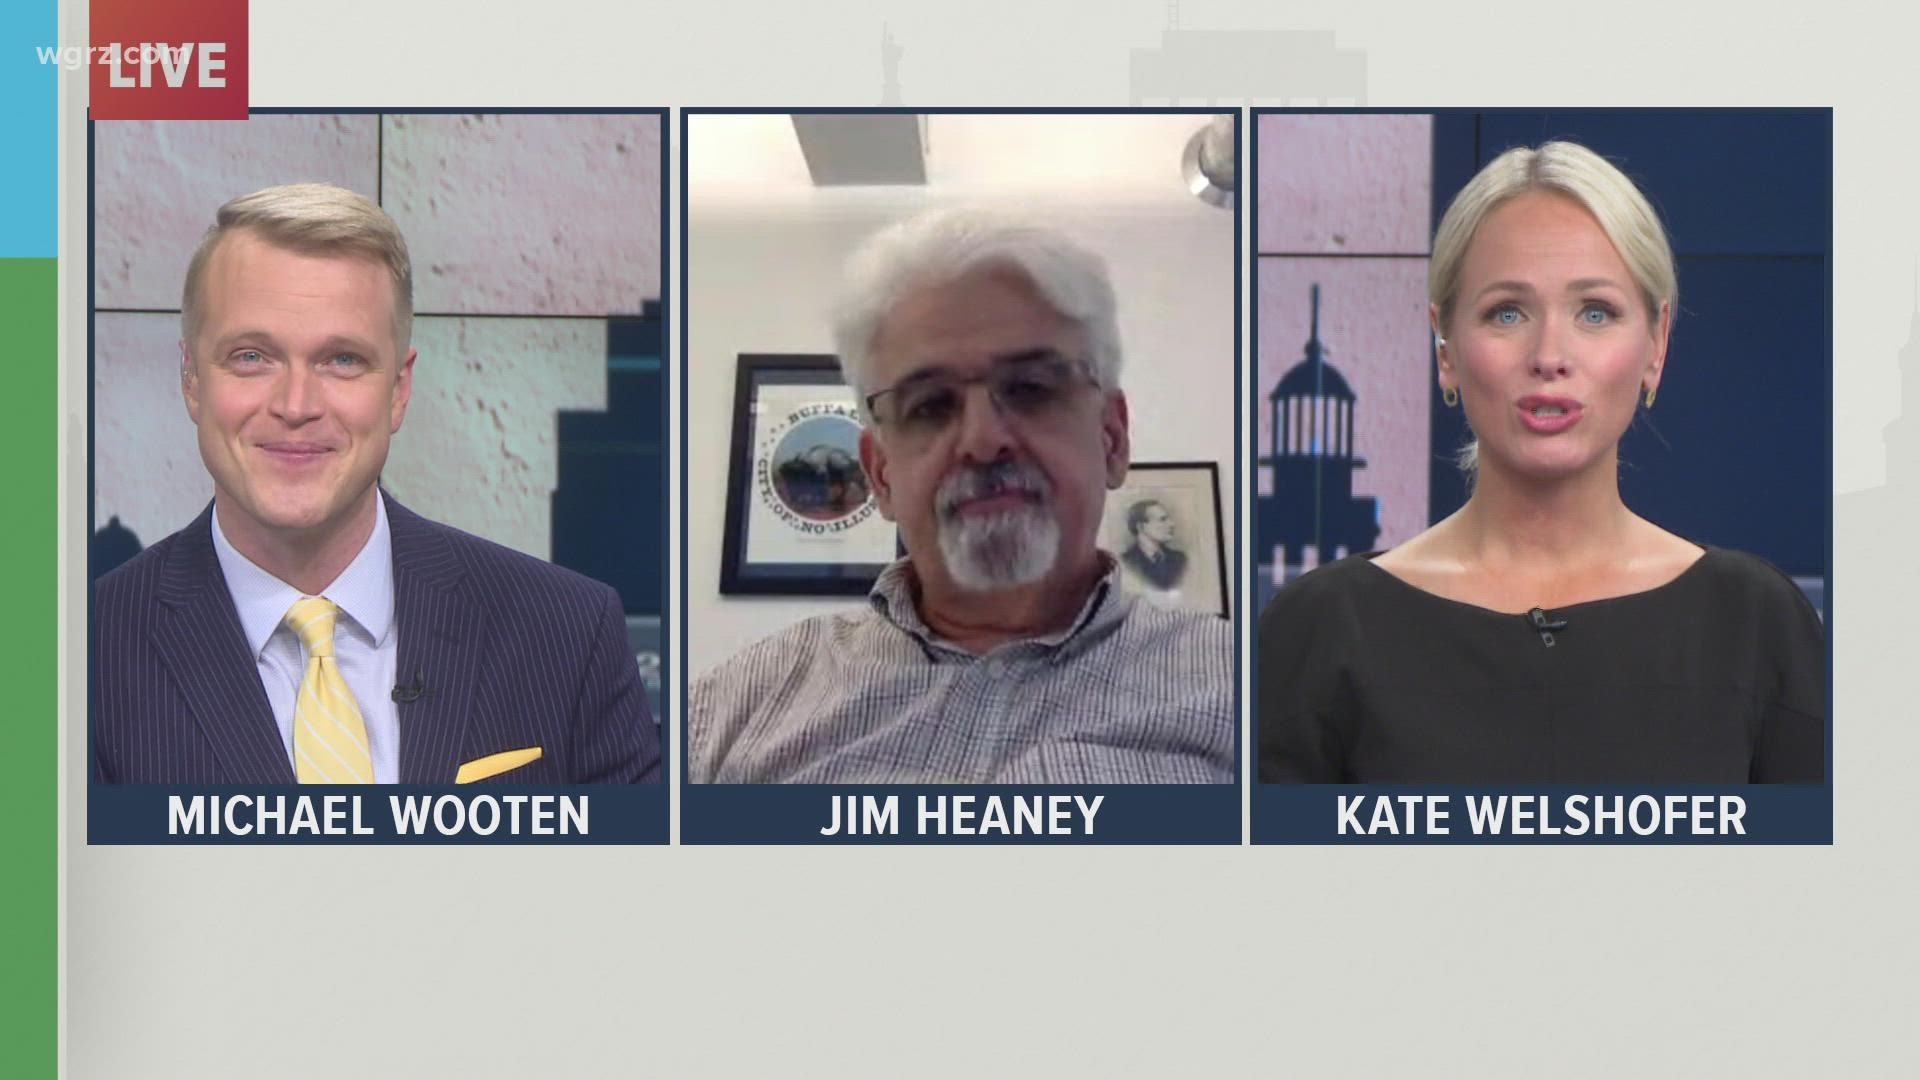 Investigative Post's editor and executive director Jim Heaney joined our Town Hall to discuss how the write-in campaign works, ahead of November's general election.